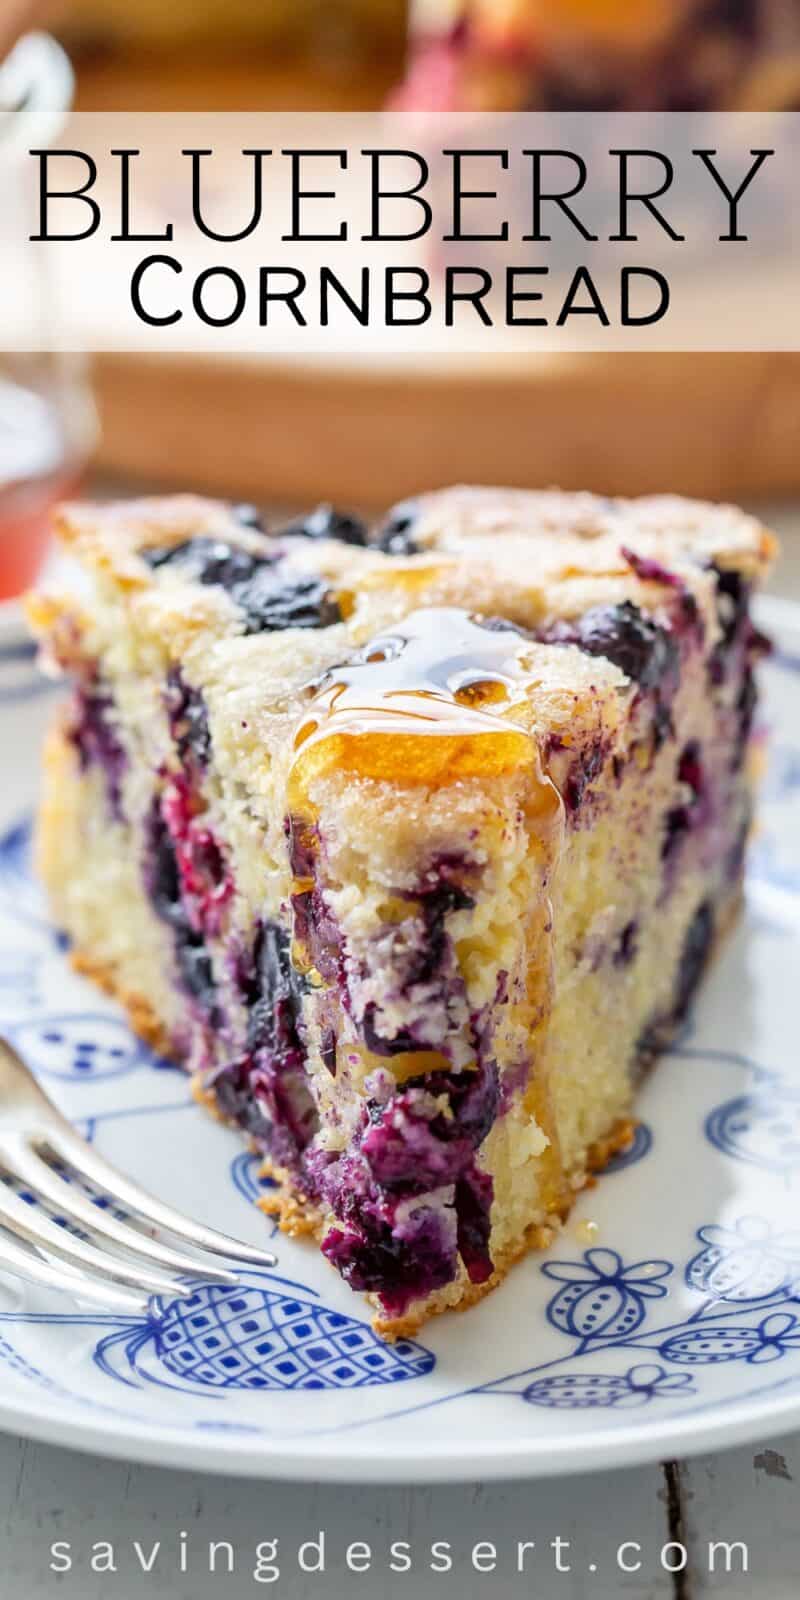 A slice of blueberry cornbread on a plate